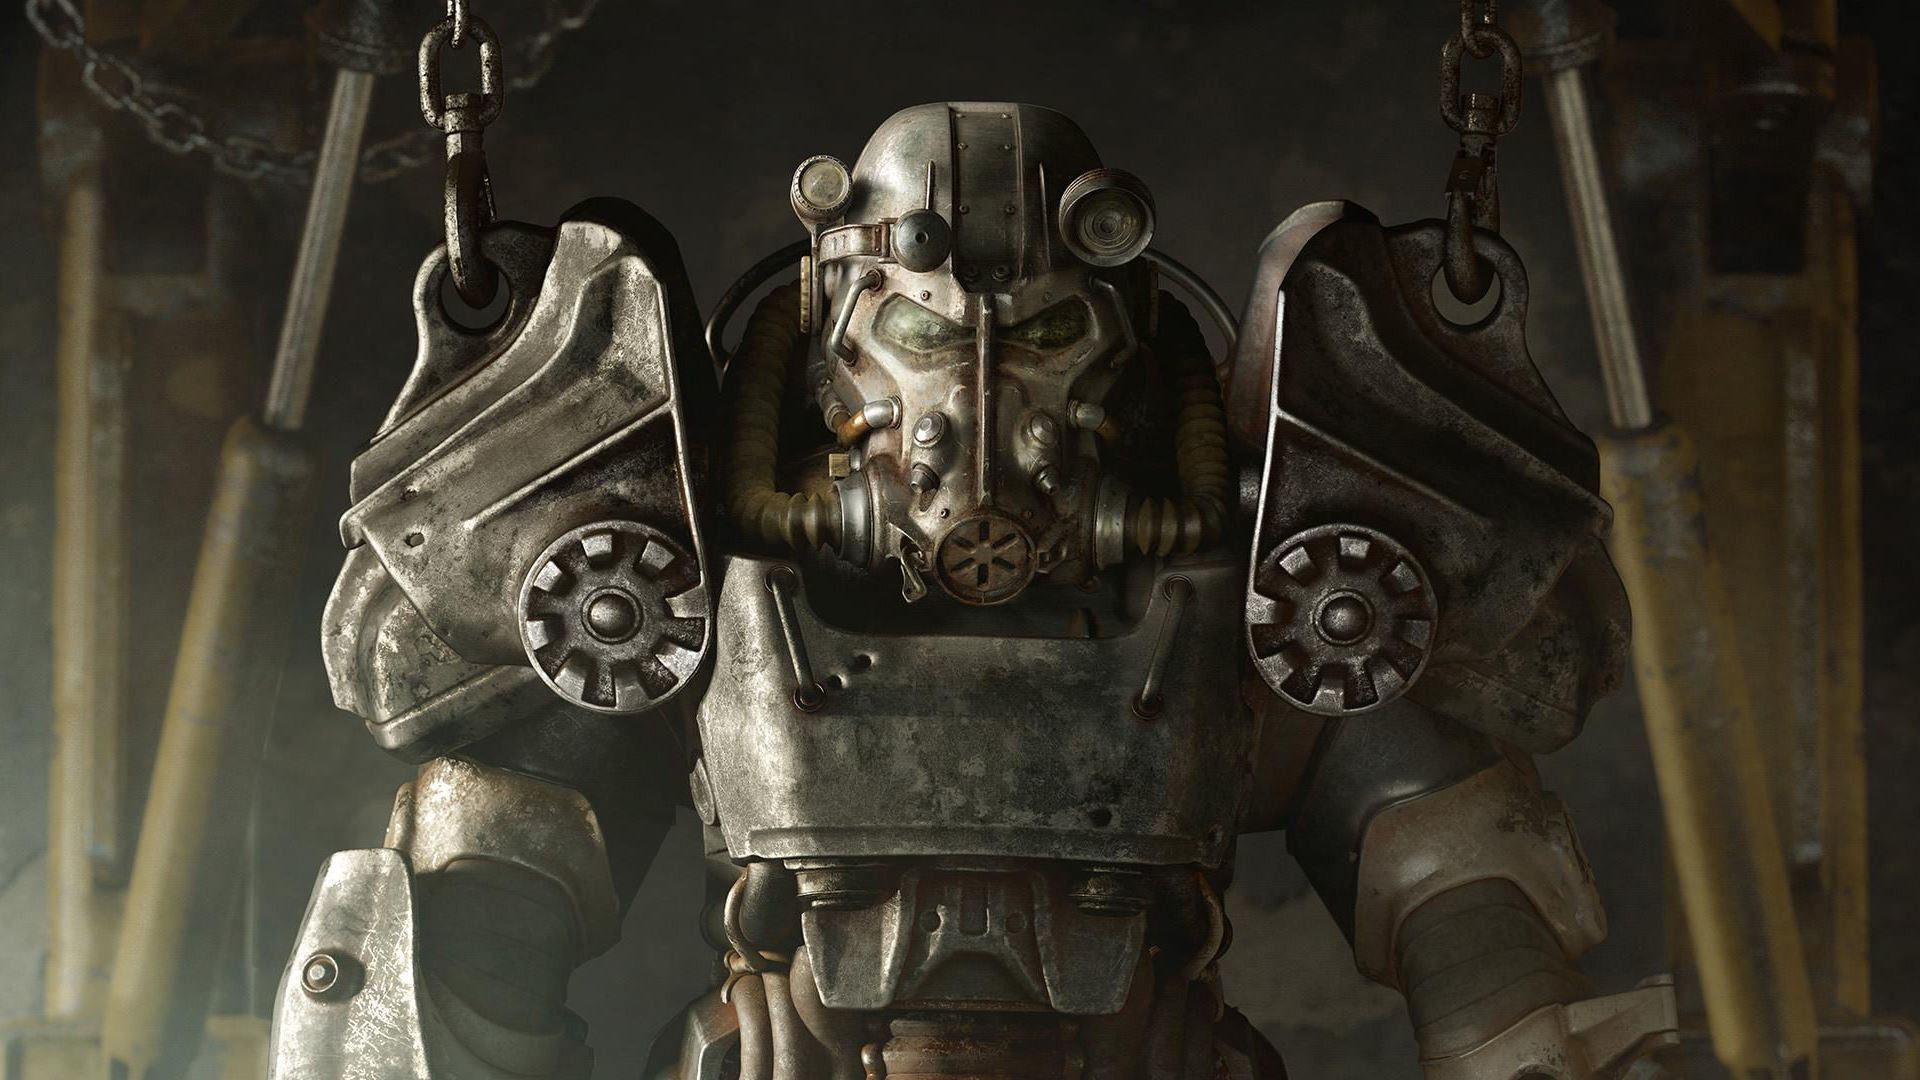 General 1920x1080 Fallout 4 Bethesda Softworks Brotherhood of Steel nuclear apocalyptic video games Fallout power armor frontal view futuristic armor PC gaming video game art